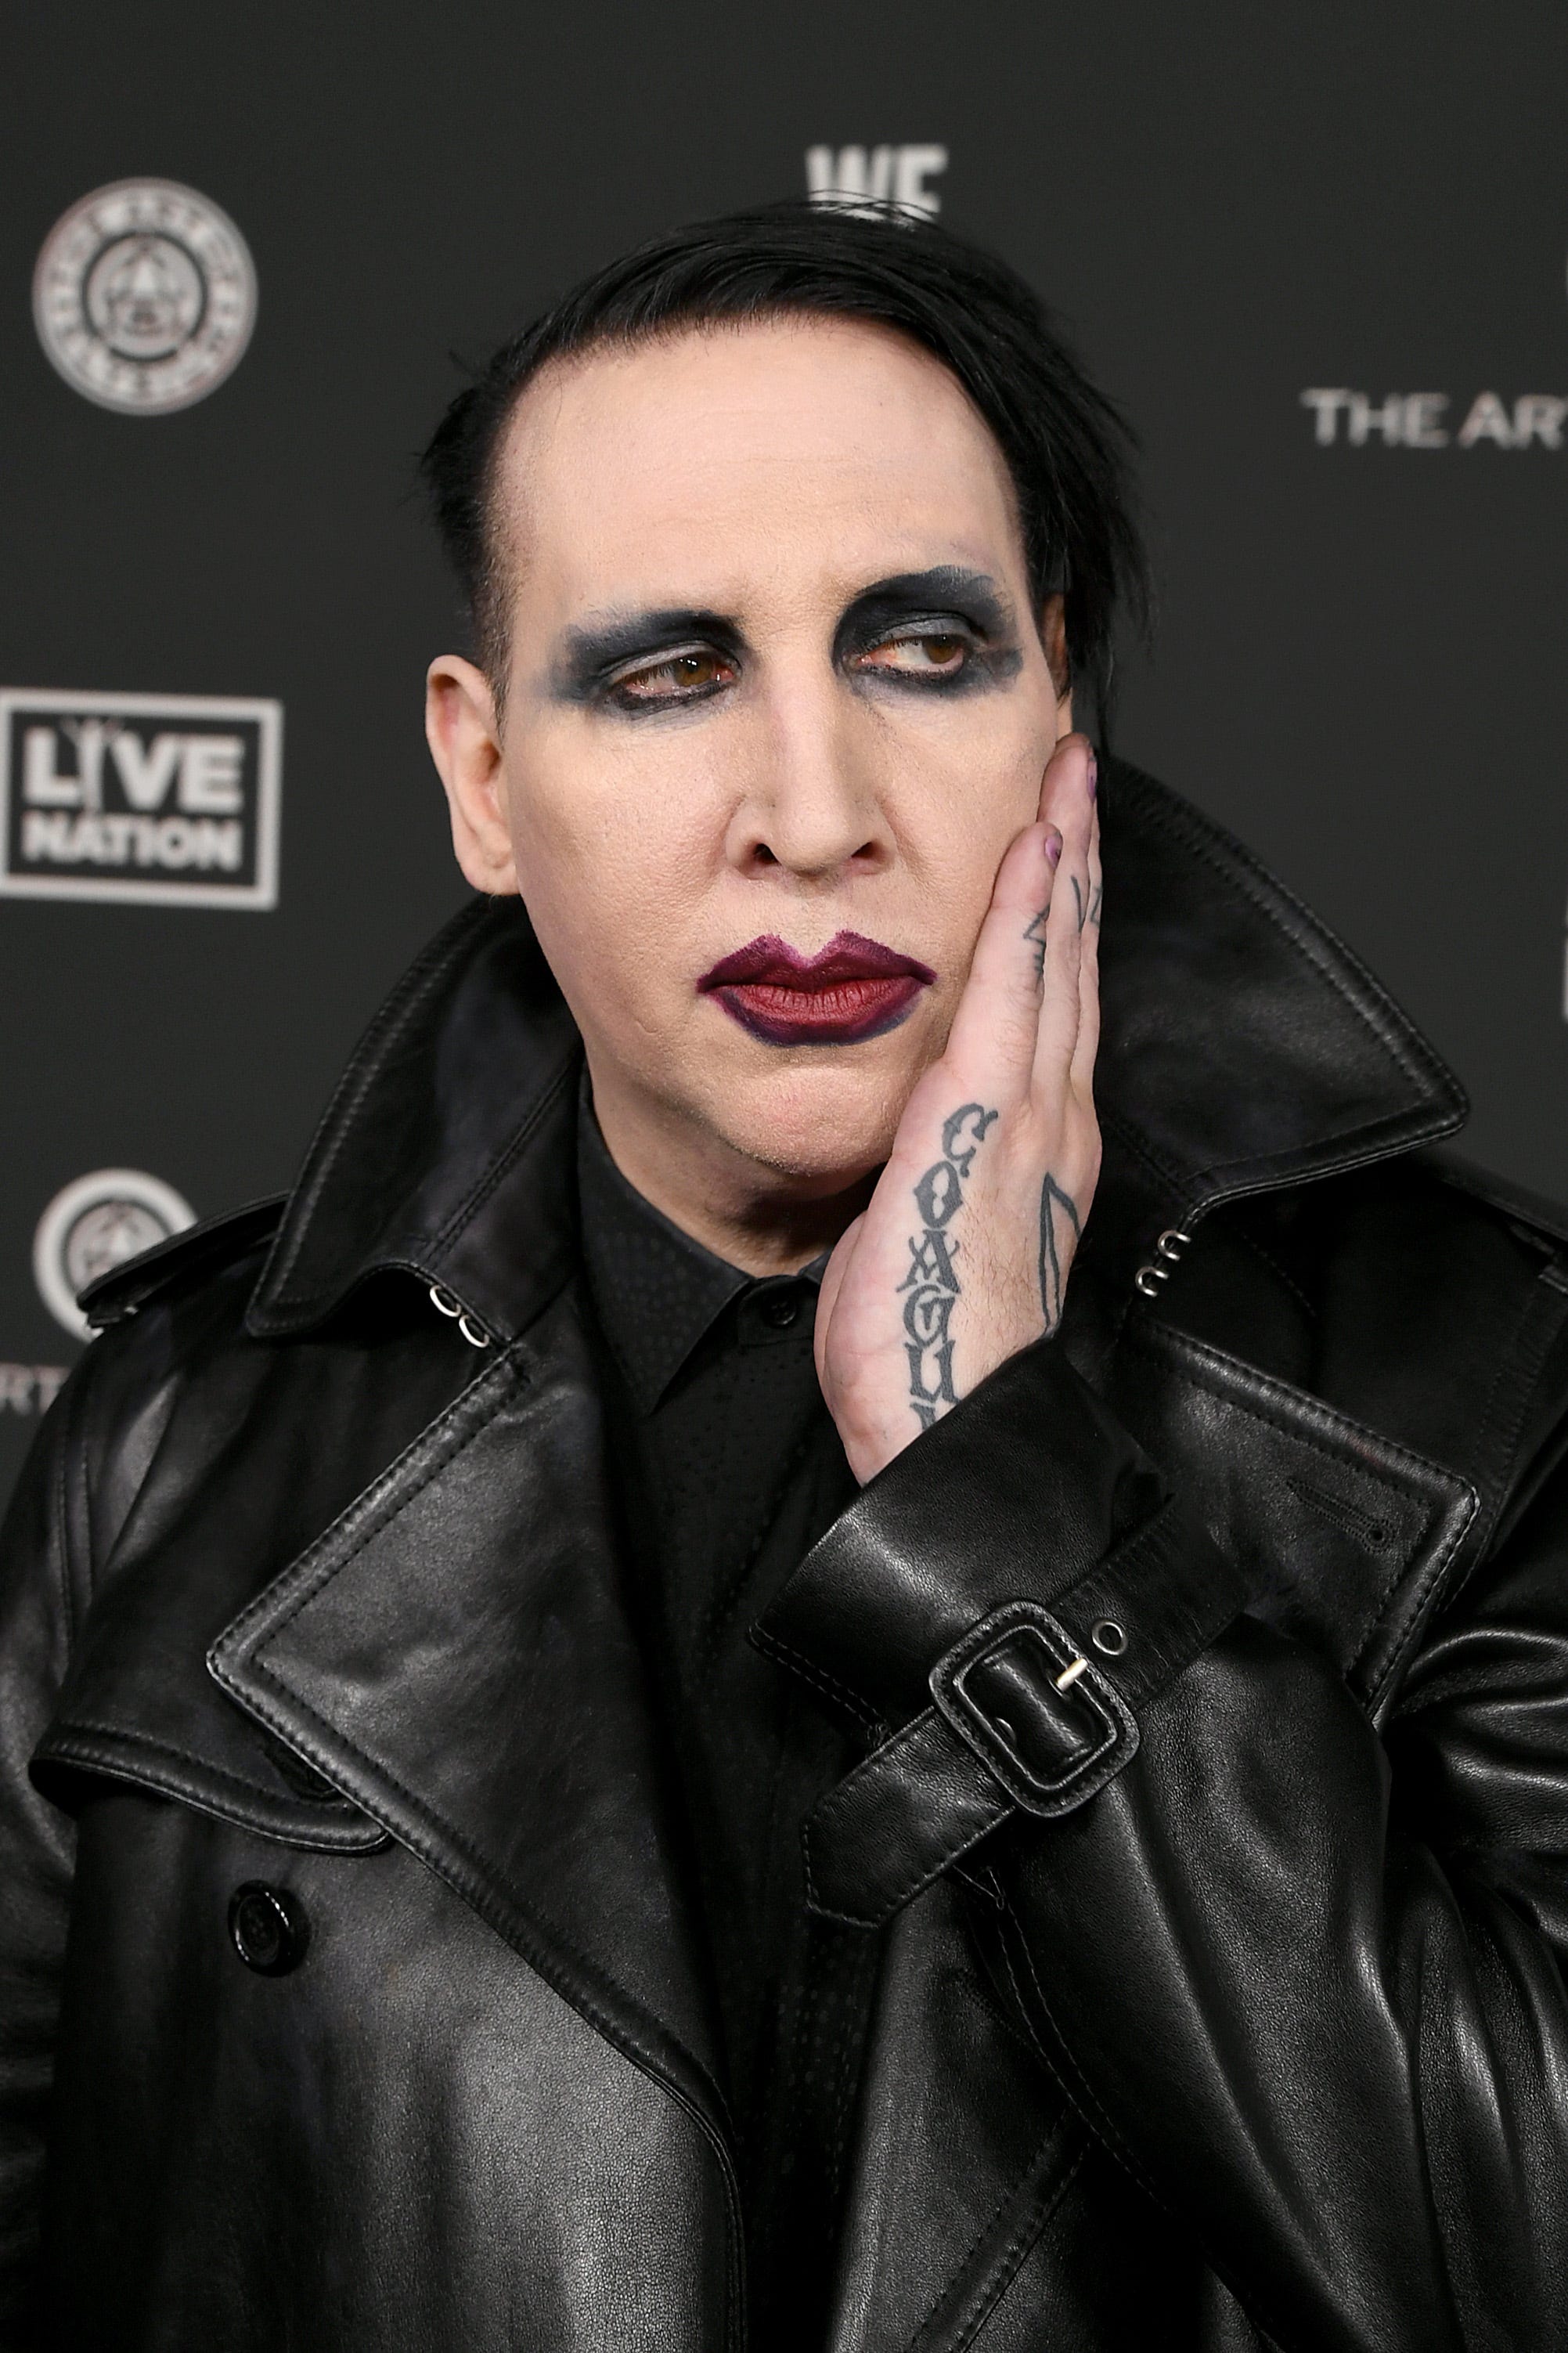 Marilyn Manson sued by Jane Doe for sexually assaulting the plaintiff when she was 16 years old and which persisted through adulthood